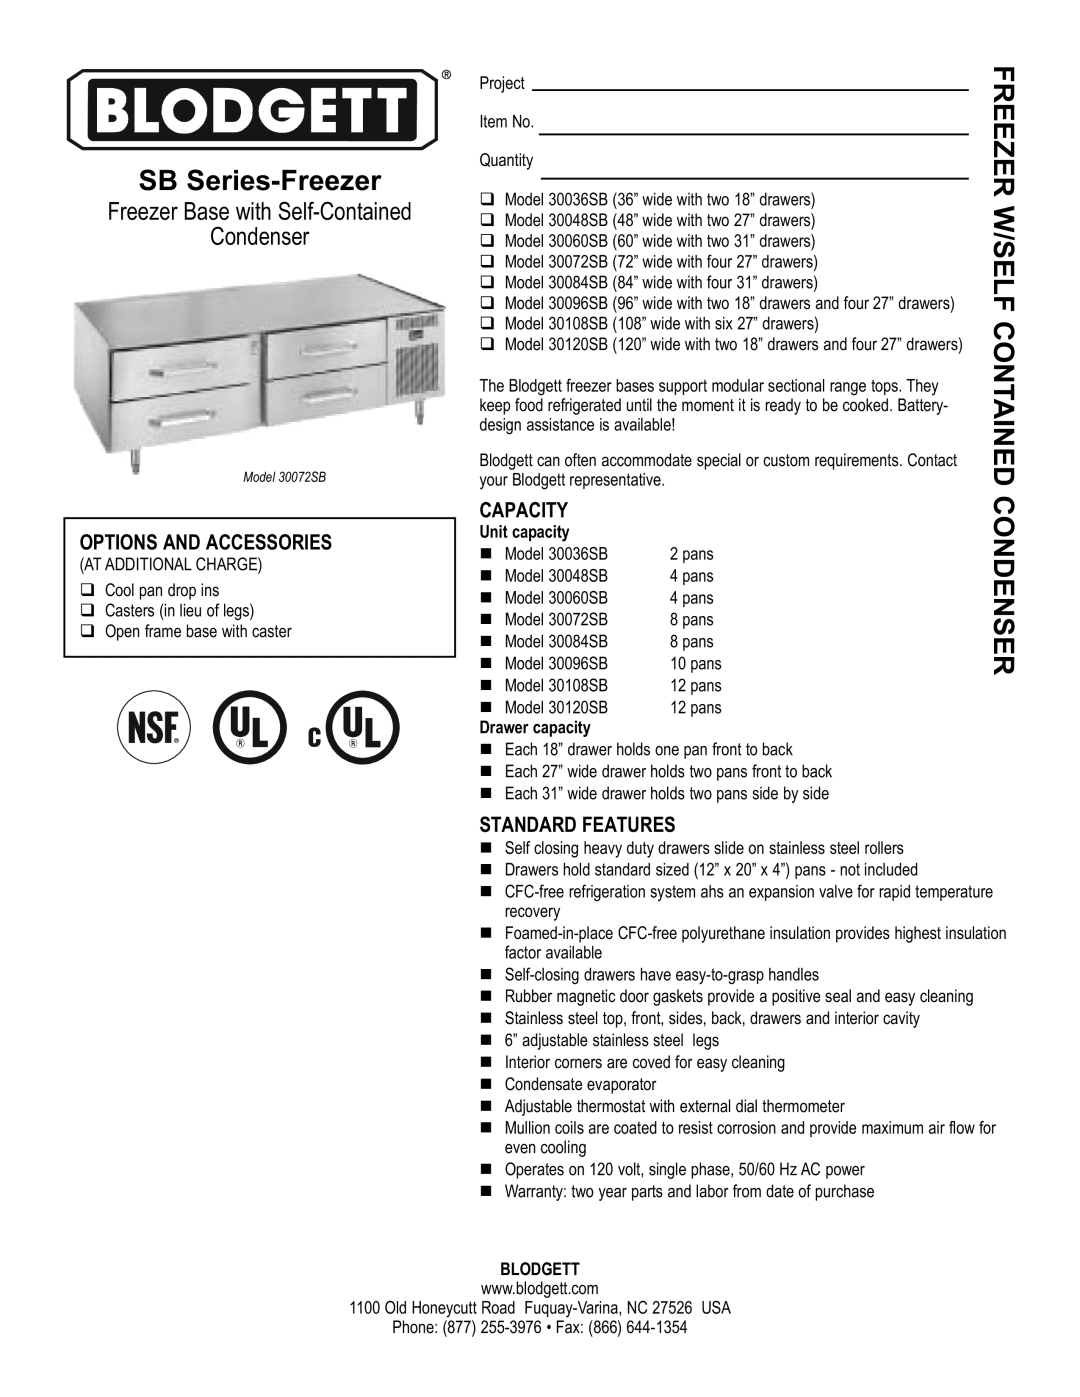 Blodgett 30096SB warranty SB Series-Freezer, Freezer W/Self Contained Condenser, Options And Accessories, Capacity 